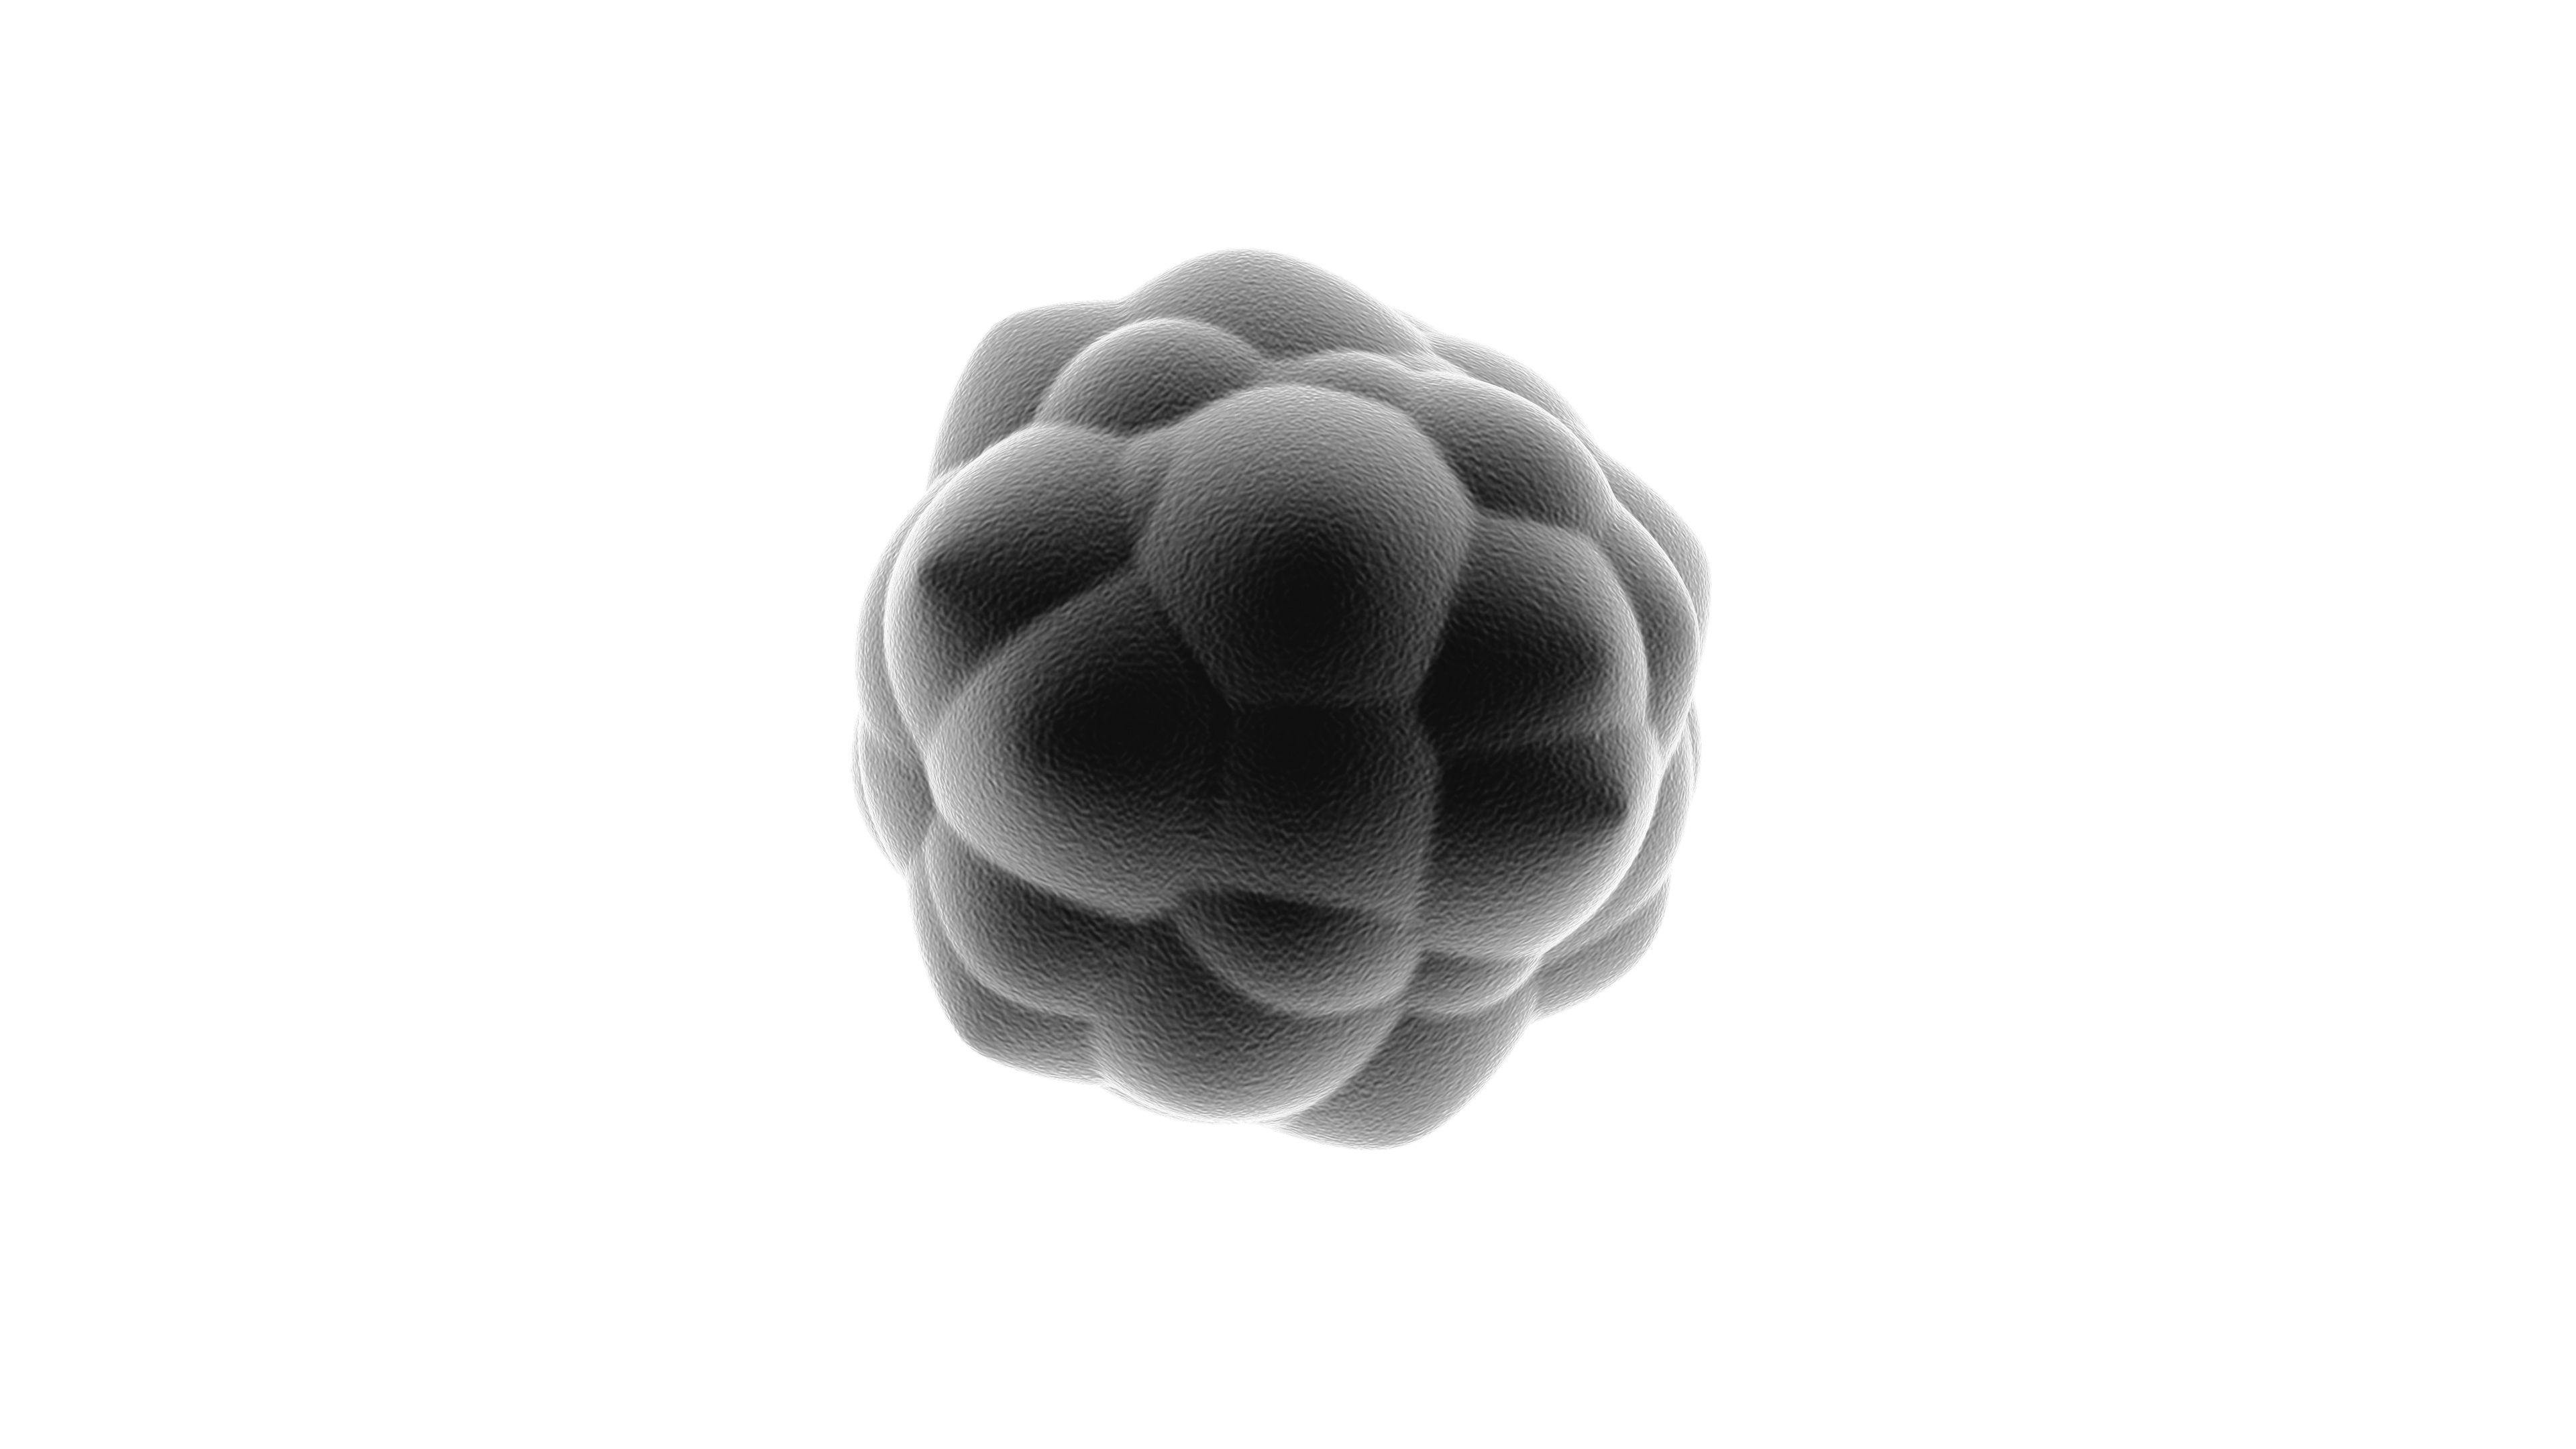 3D rendering of a black ball with an uneven surface on a white background. The ball glows and looks like a virus, a dangerous microorganism. Abstract illustration for medical compositions. | Image Credit: © Станислав Чуб - stock. adobe.com